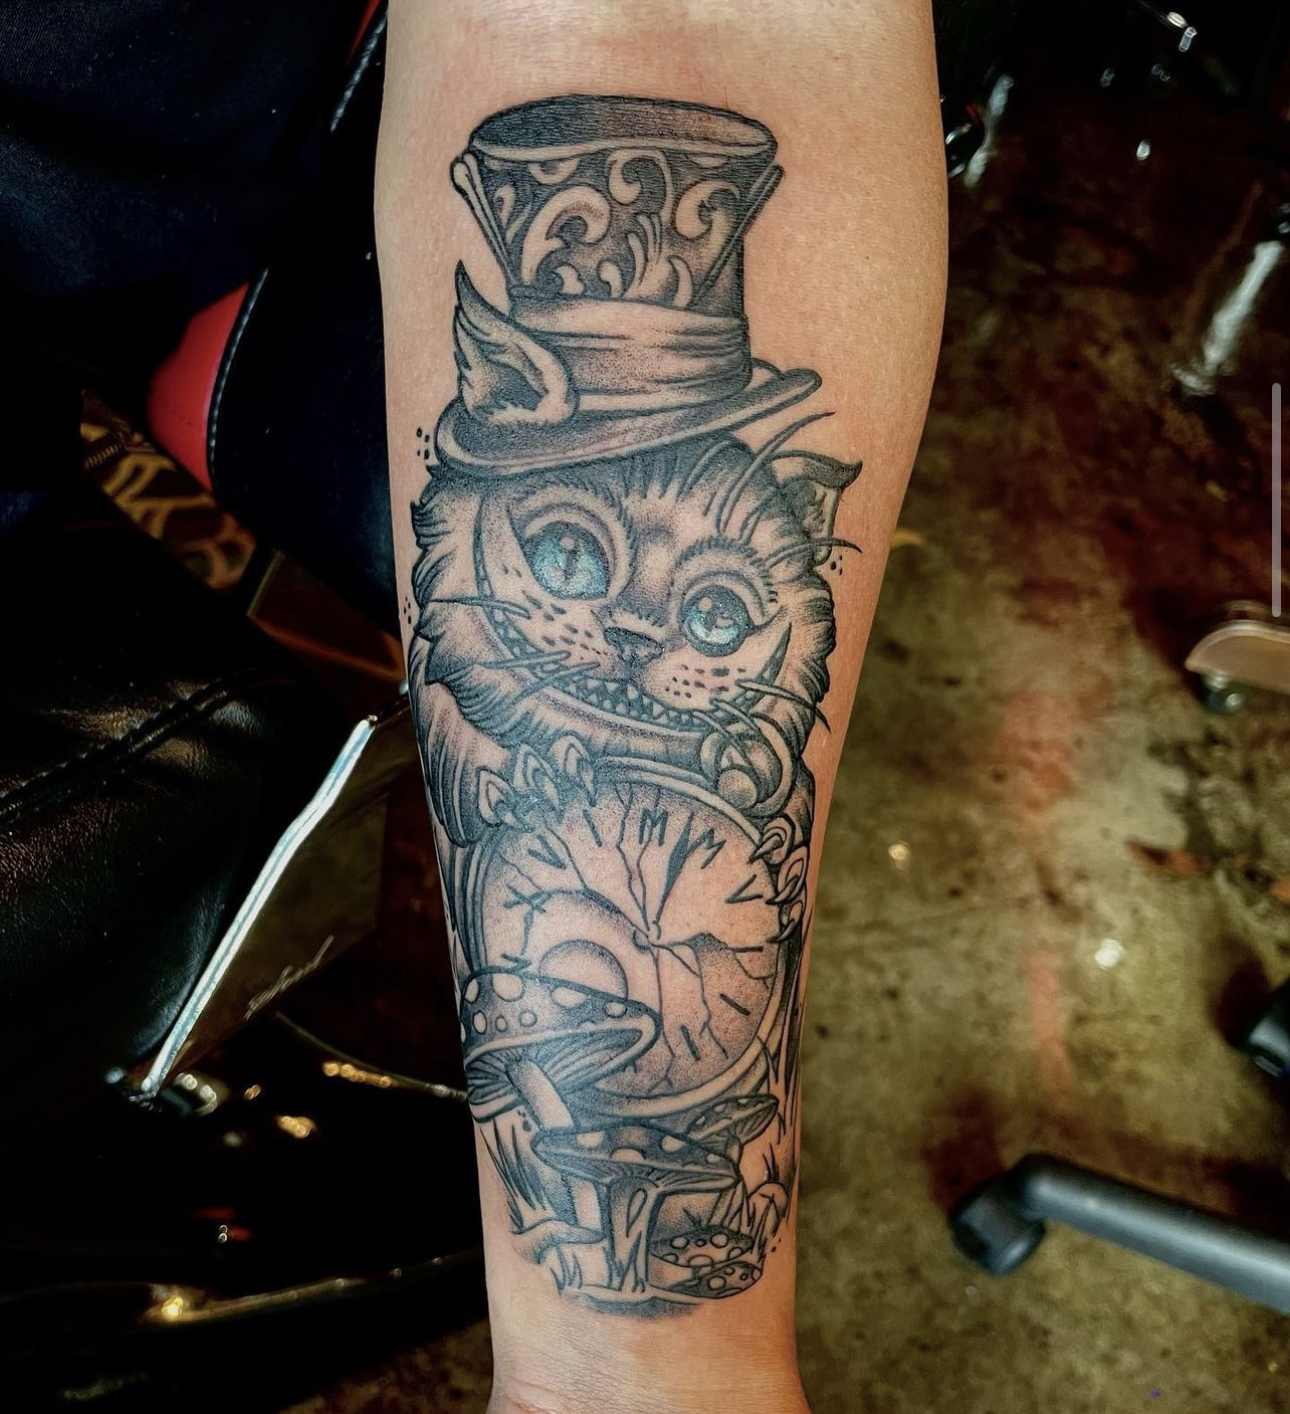 tattoo of a cat with a hat and a clock